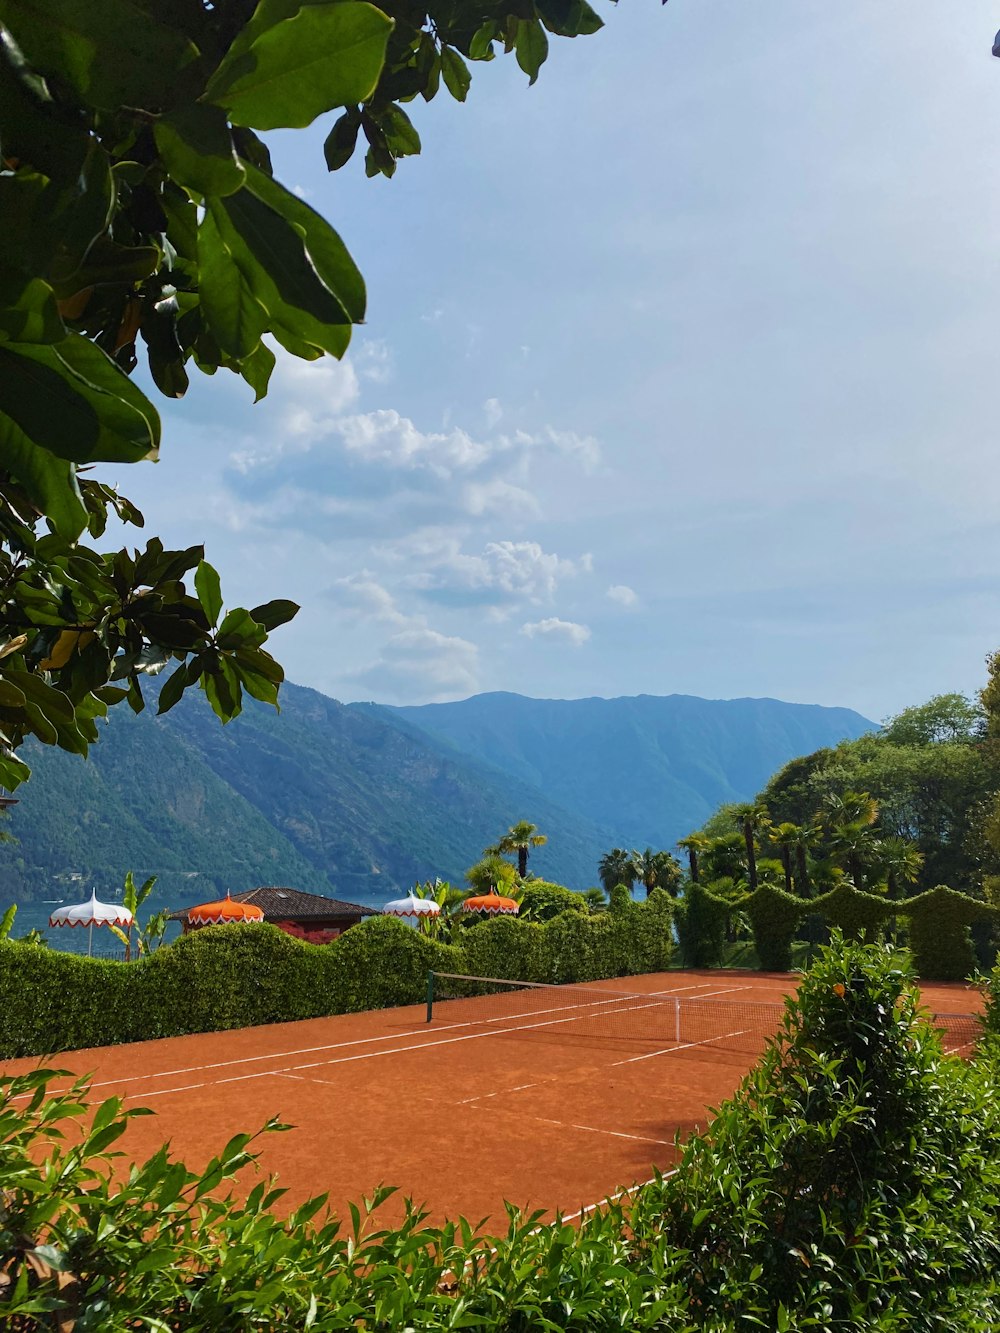 a tennis court surrounded by greenery and mountains